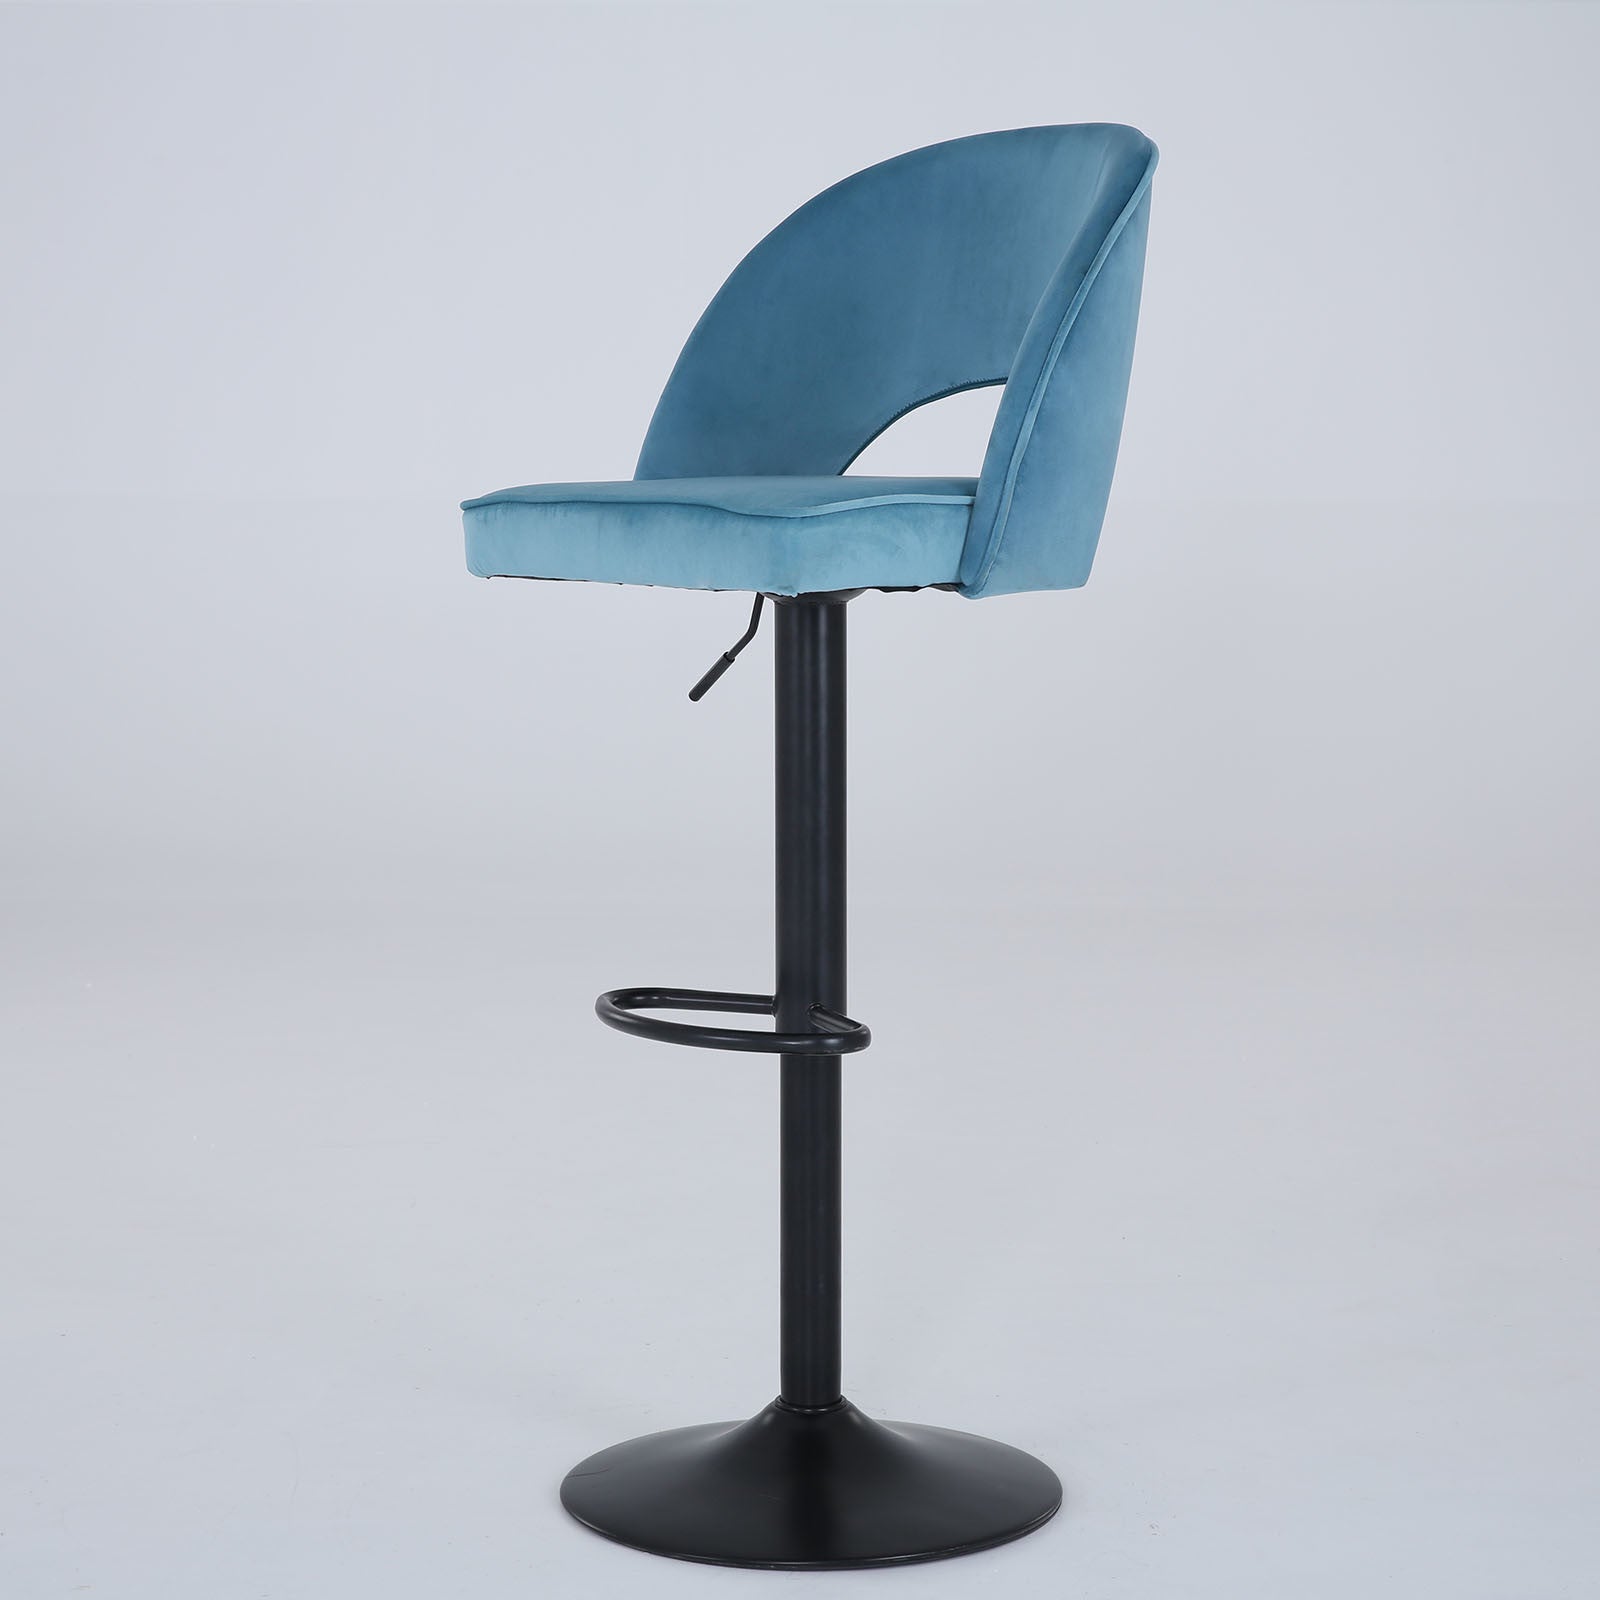 Modern Bar Stool with a curved backrest and an adjustable height black pedestal base, isolated on a white background.